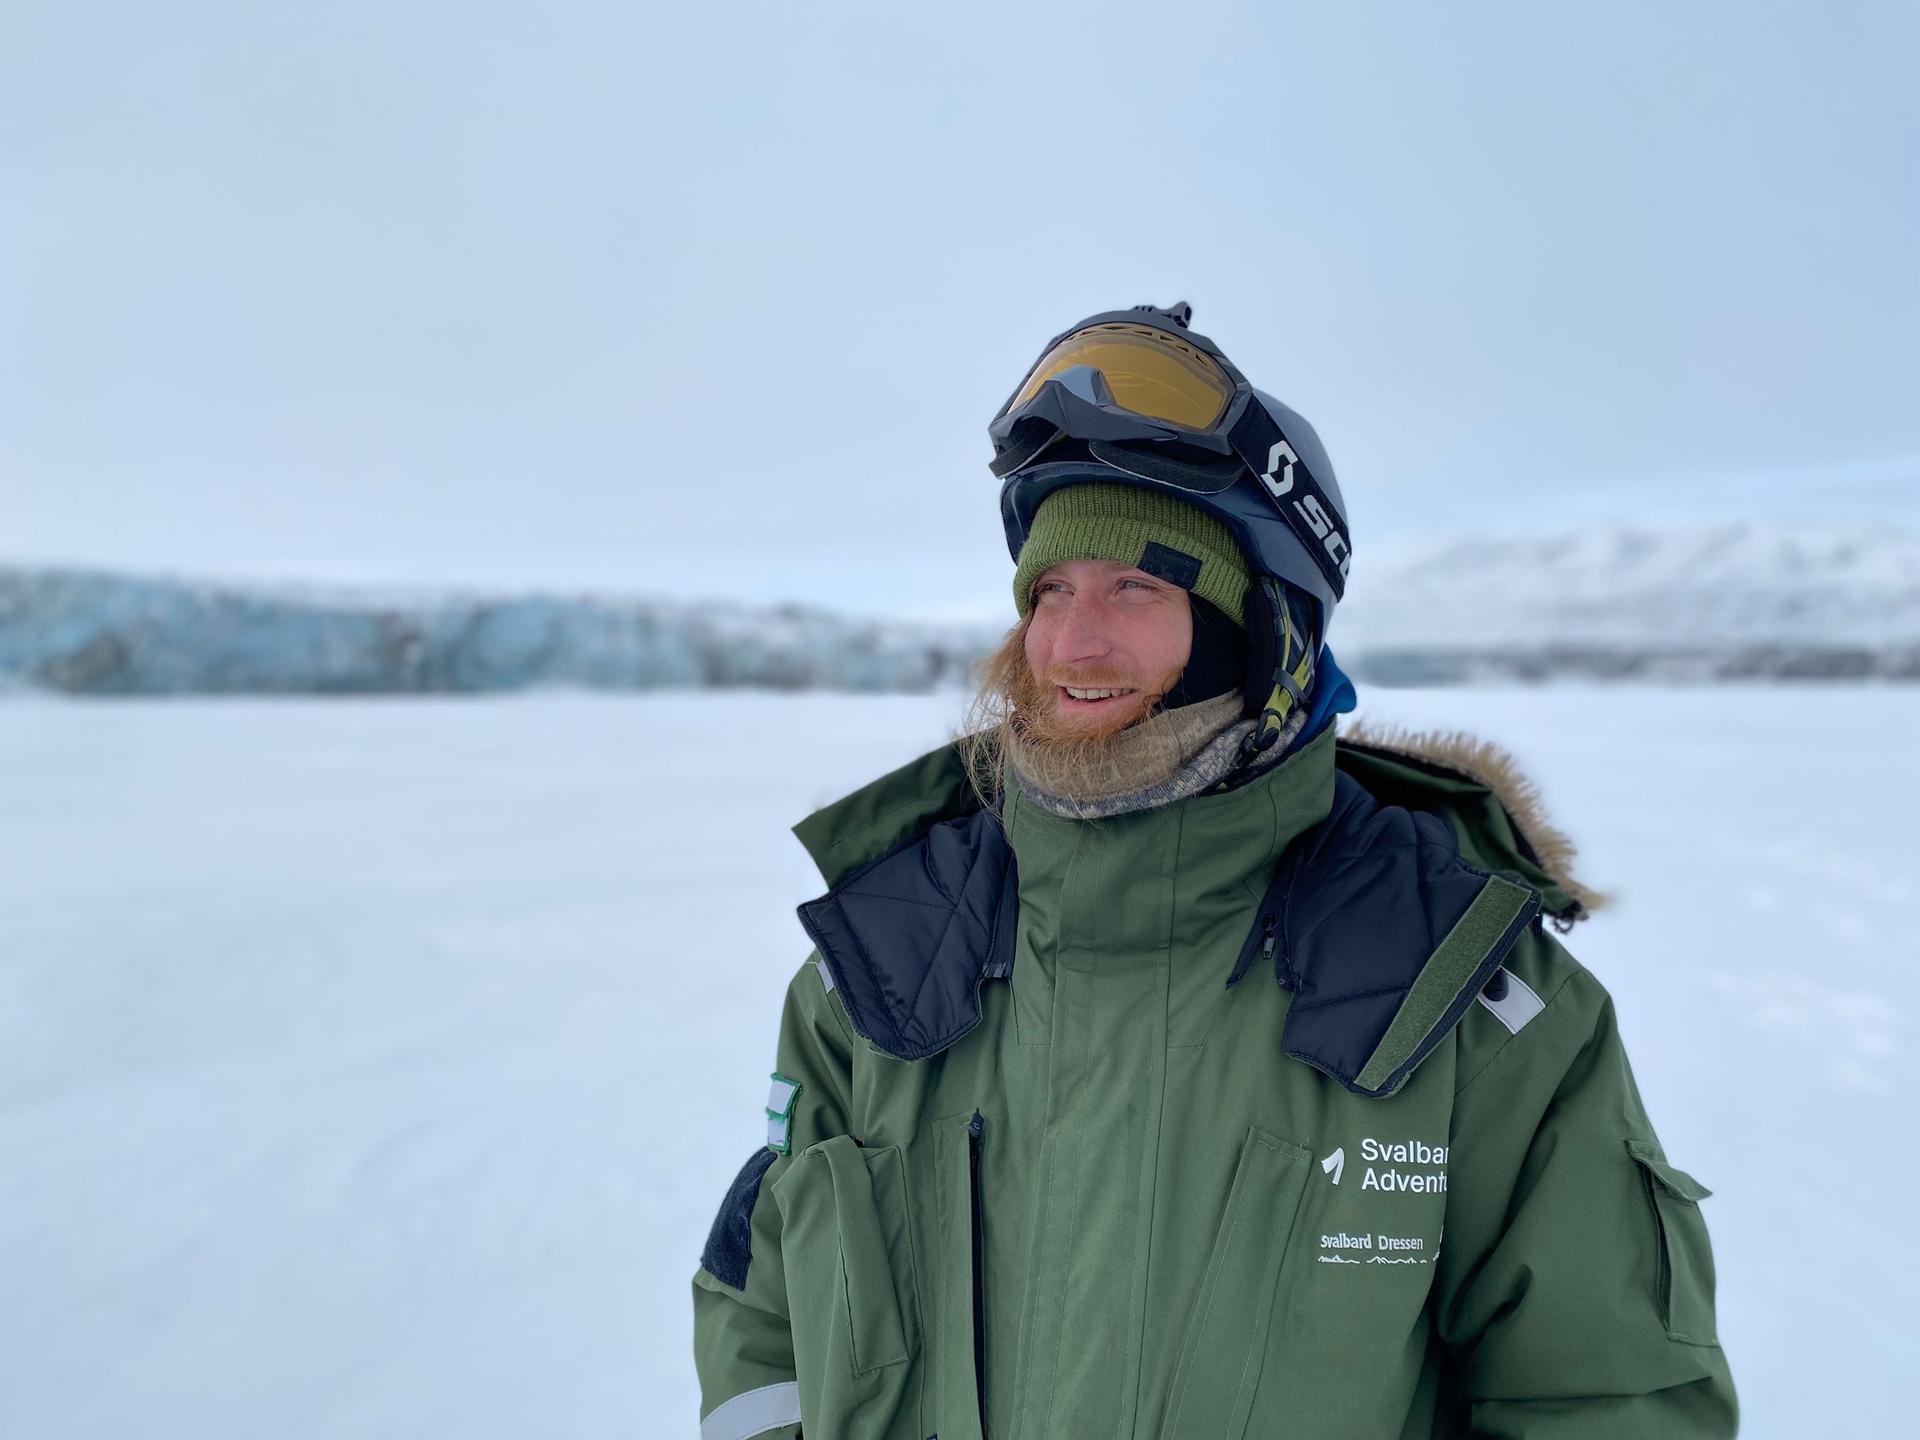 Arctic guide Timo Virma Virta Santucci just spotted his first polar bear of the season on Svalbard.